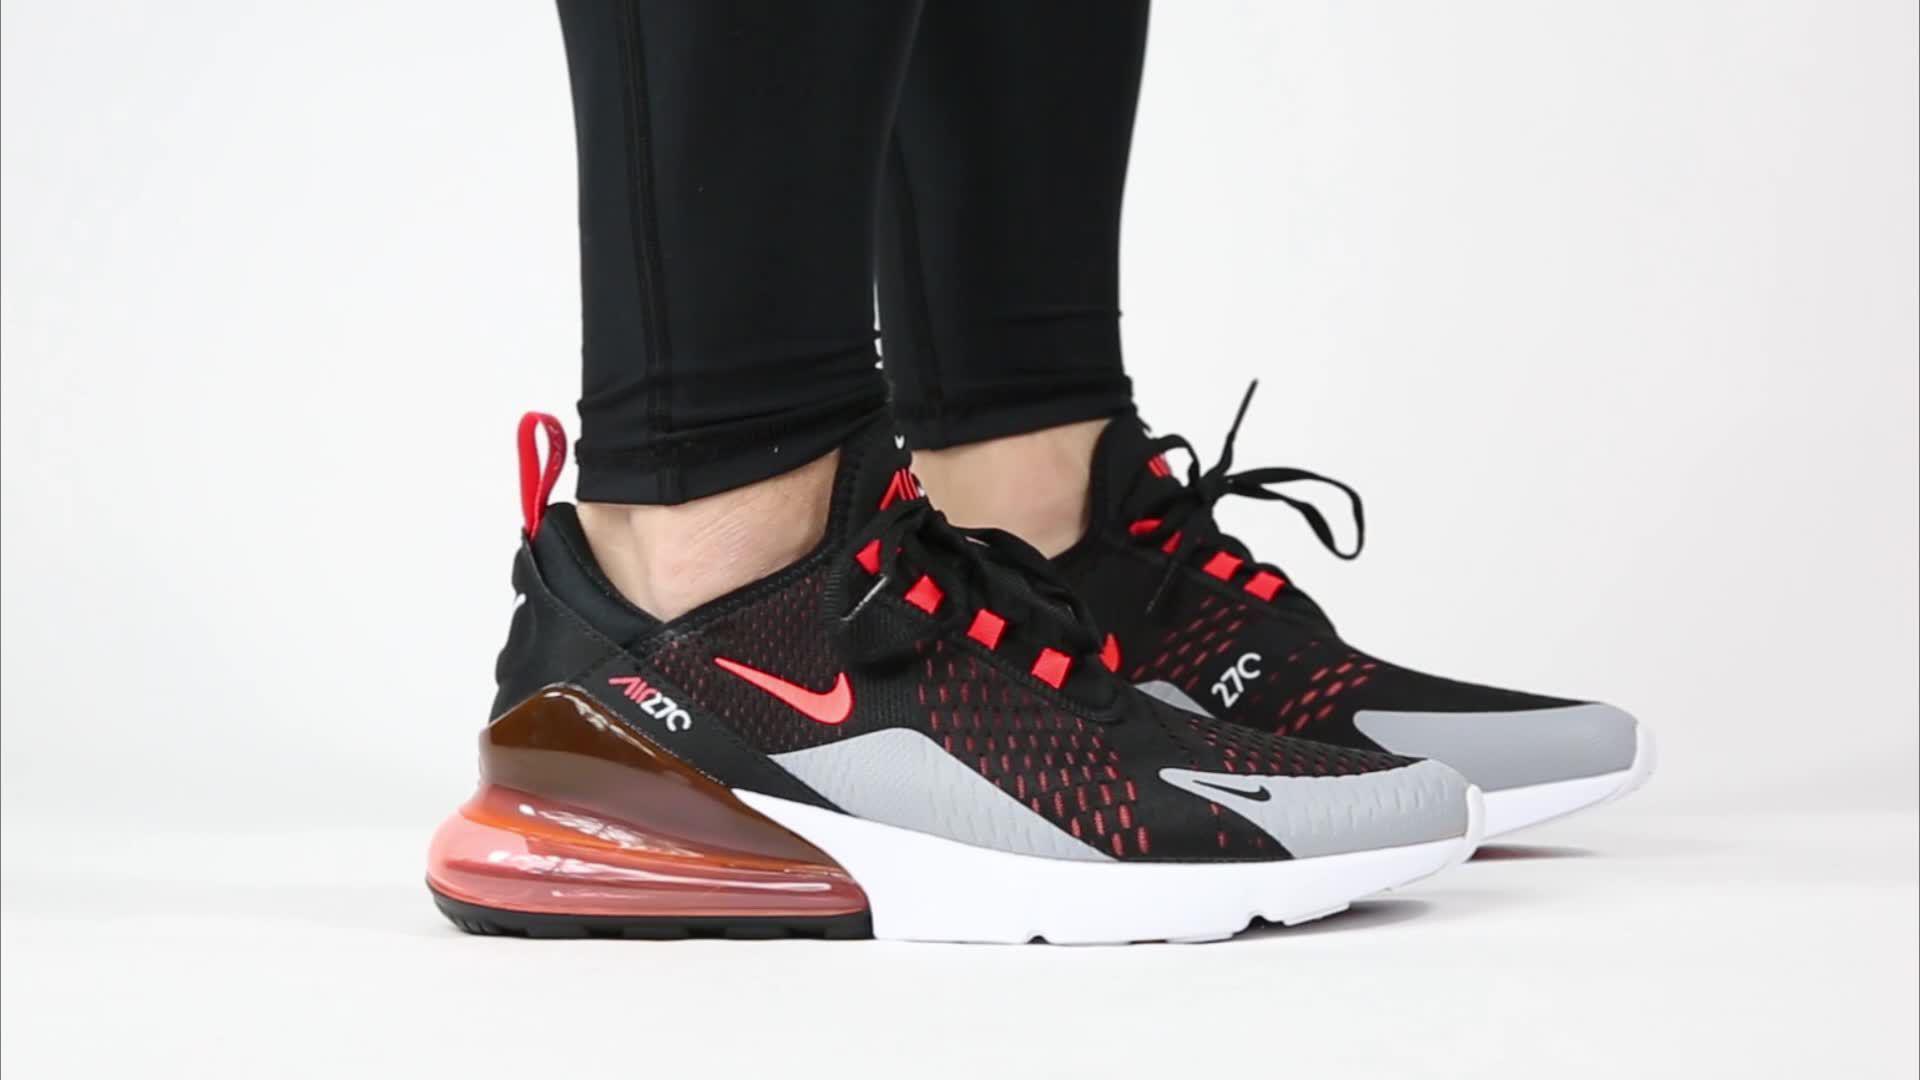 Nike Rubber Air Max 270 Shoes In Black Red Black For Men Lyst